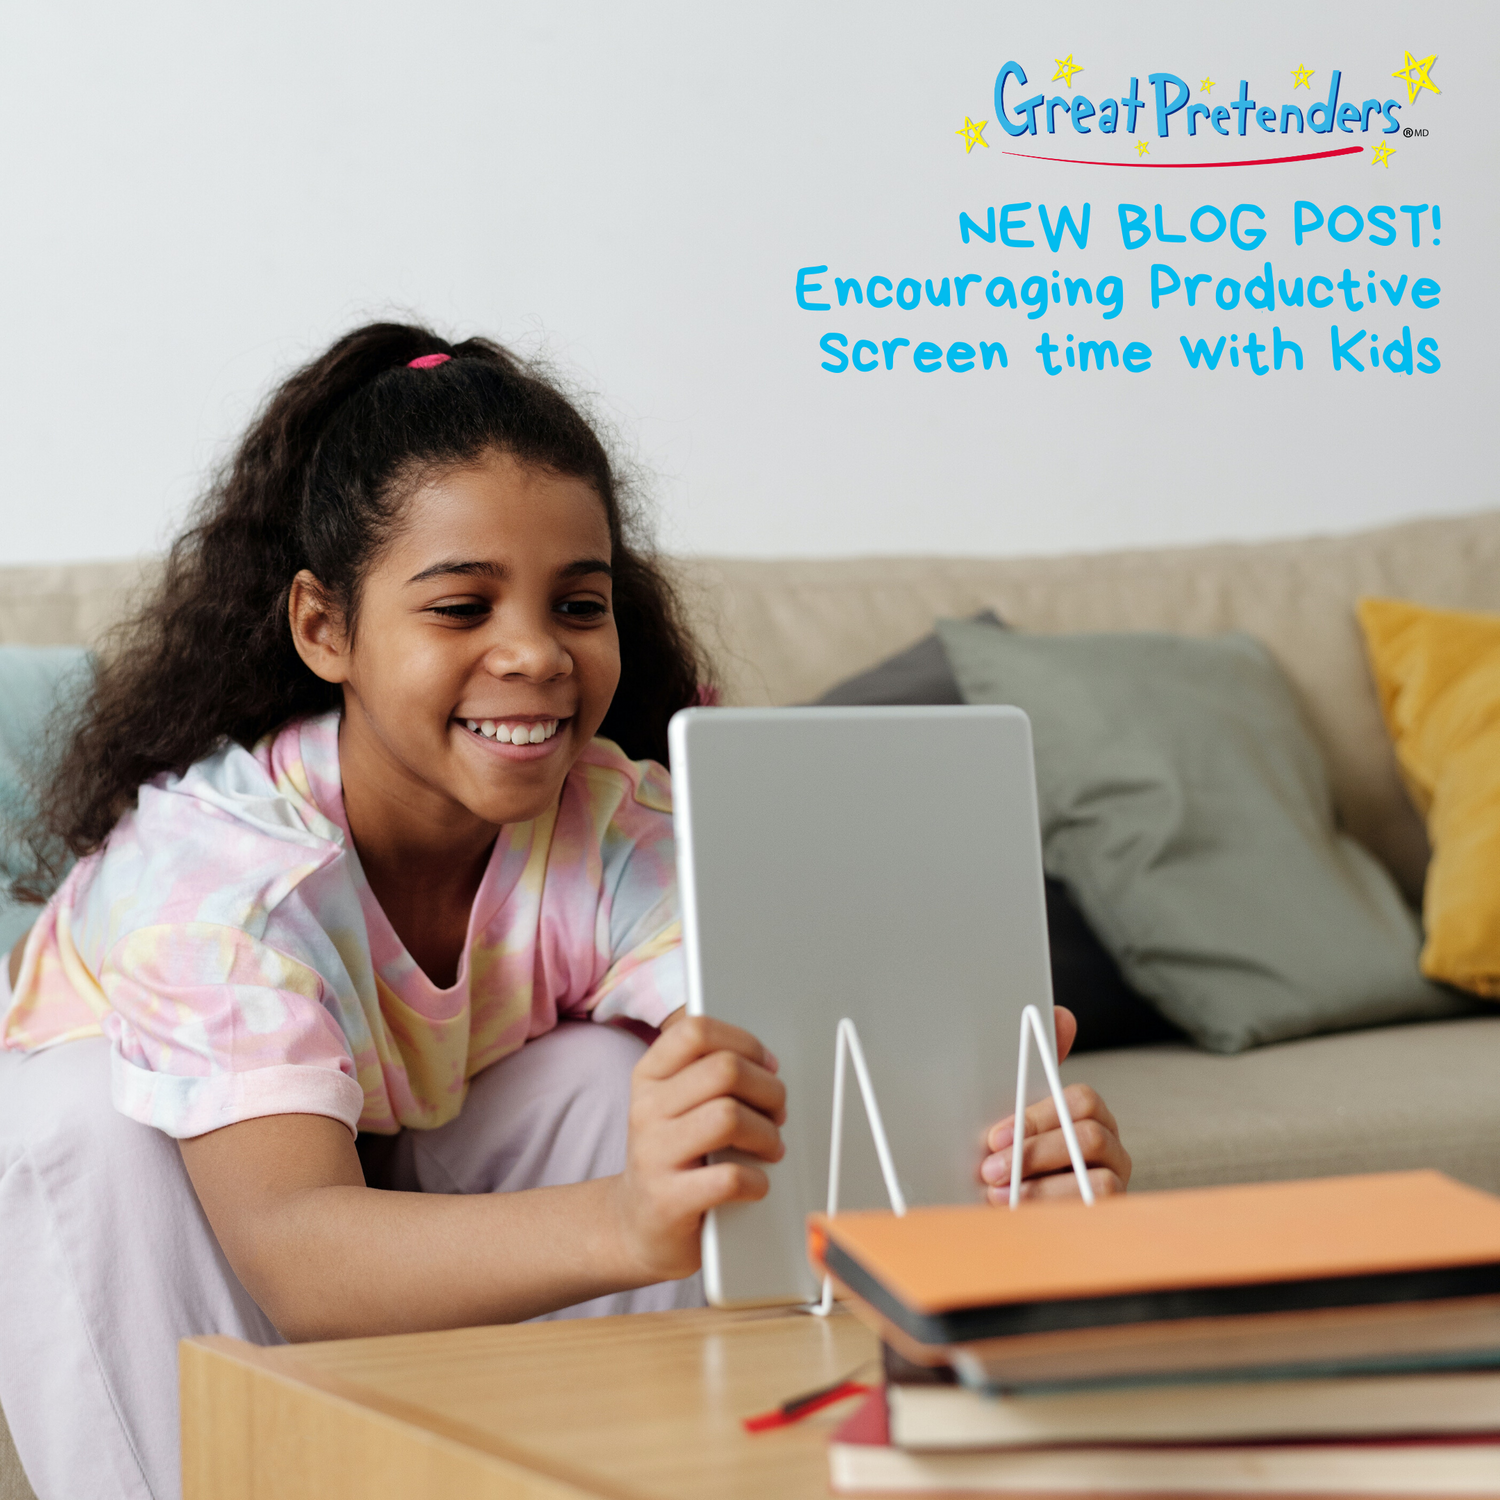 Encouraging Productive Screen time with Kids